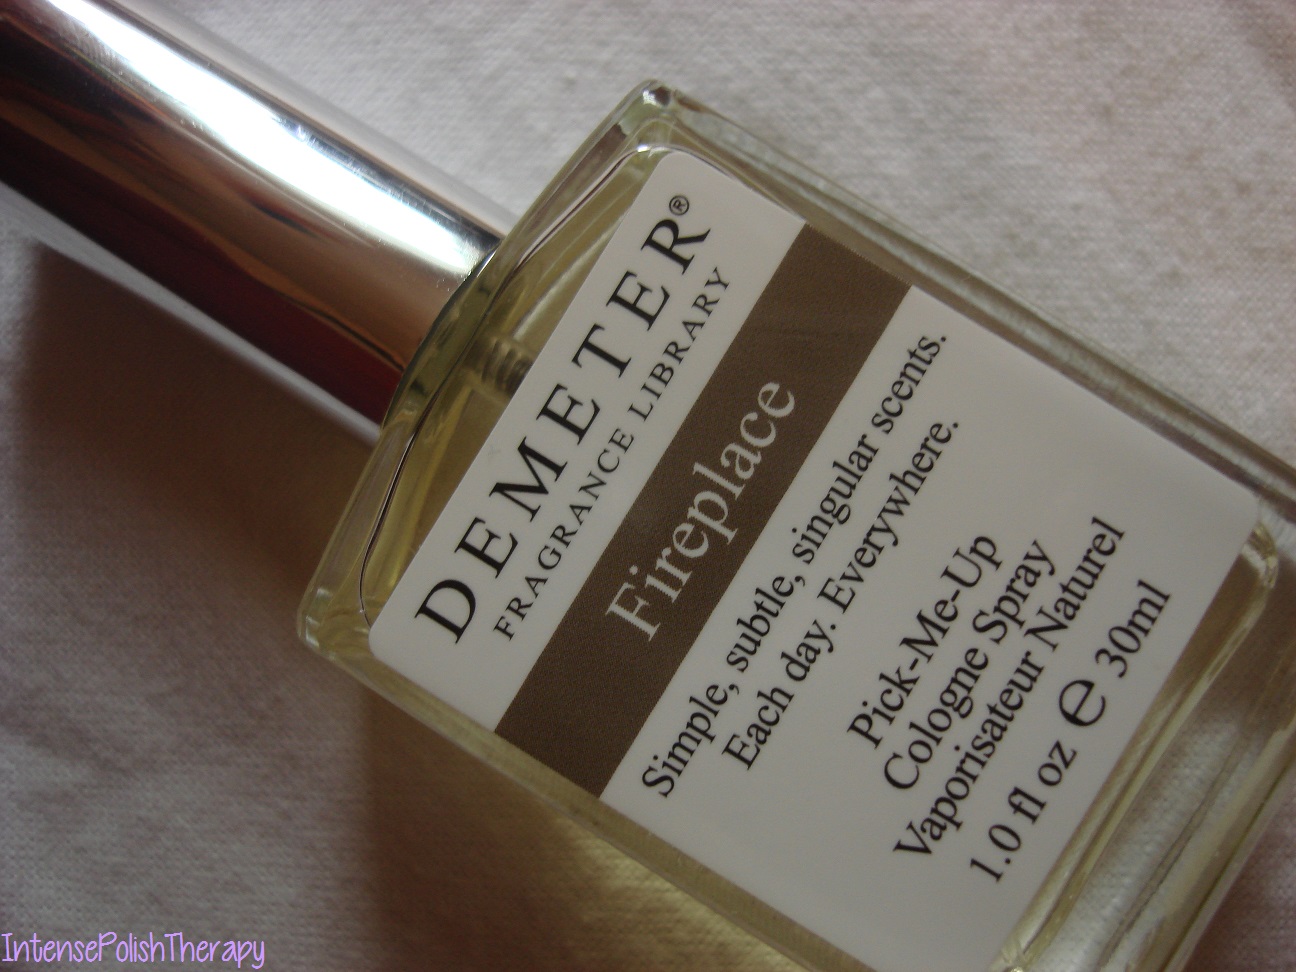 Demeter Fragrance Library - Fireplace